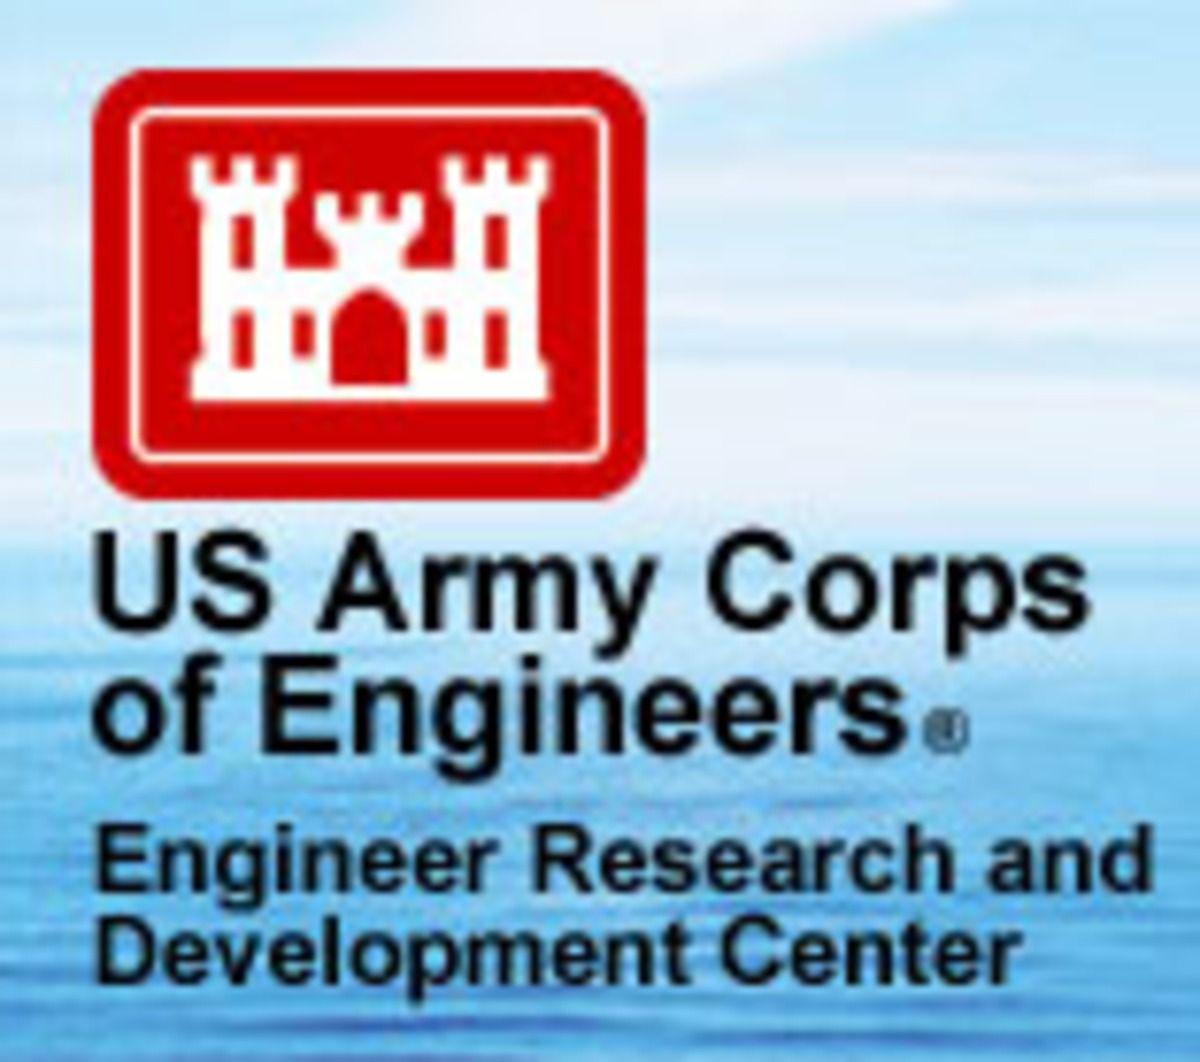 USACE Logo - Engineer Research and Development Center